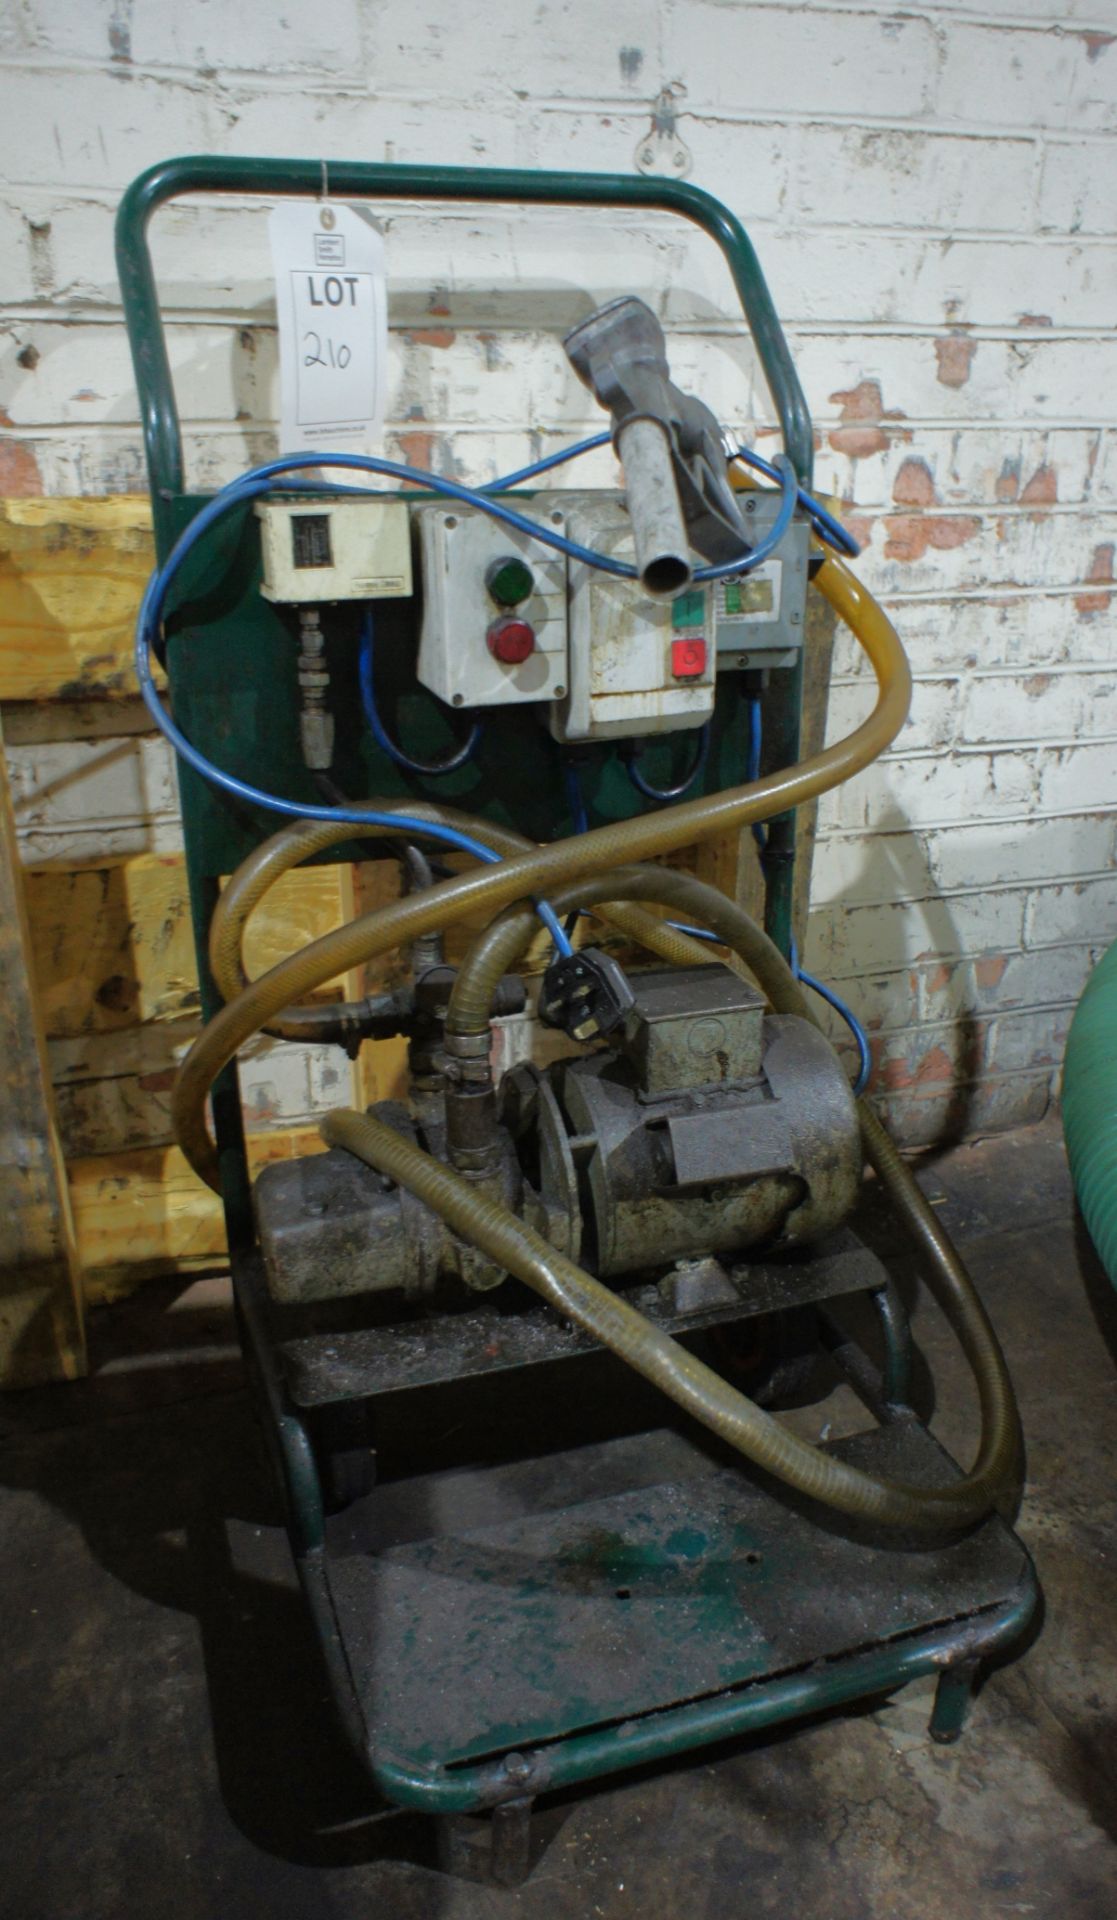 Mobile filling station with electric pump